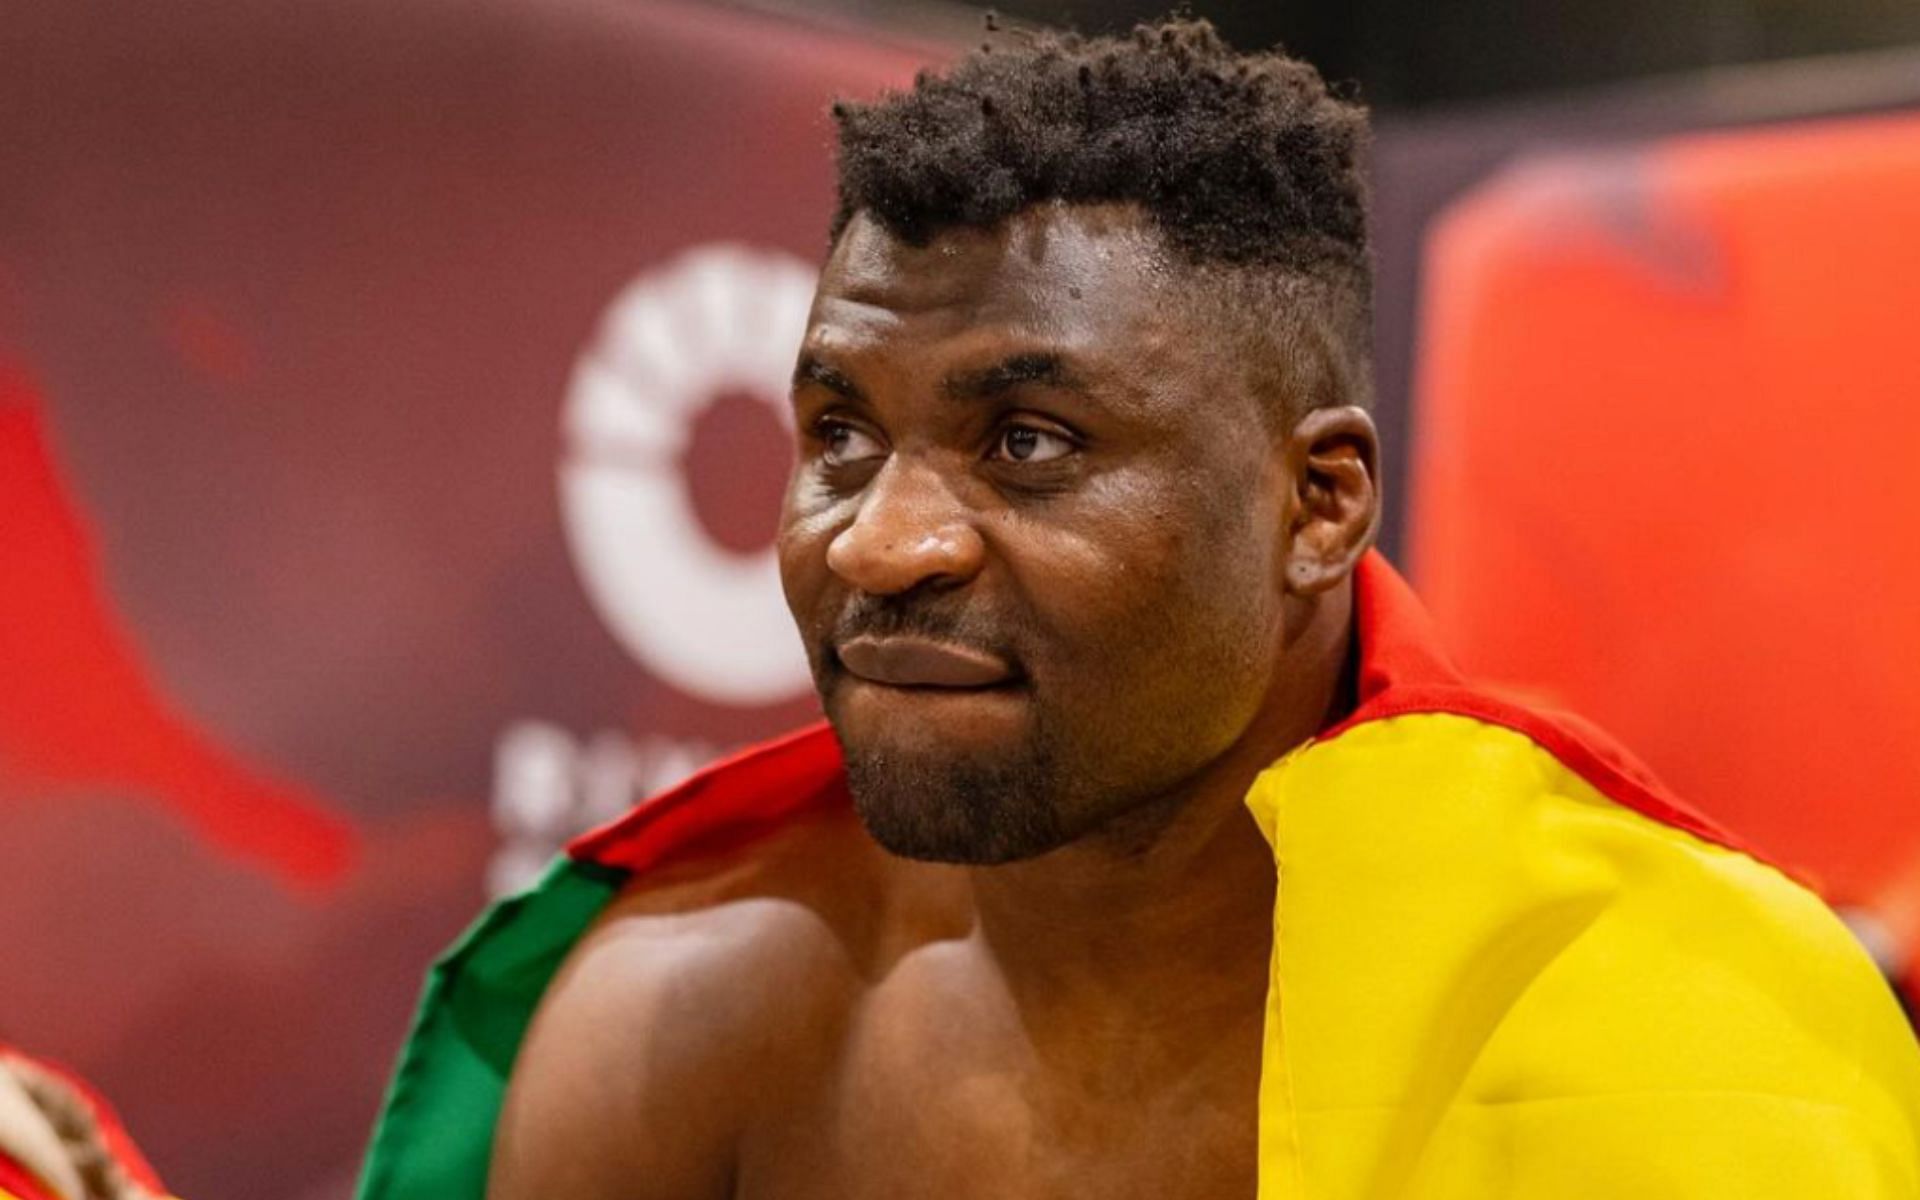 Francis Ngannou (pictured) reflects on the death of his infant son [Photo Courtesy @francisngannou on Instagram]